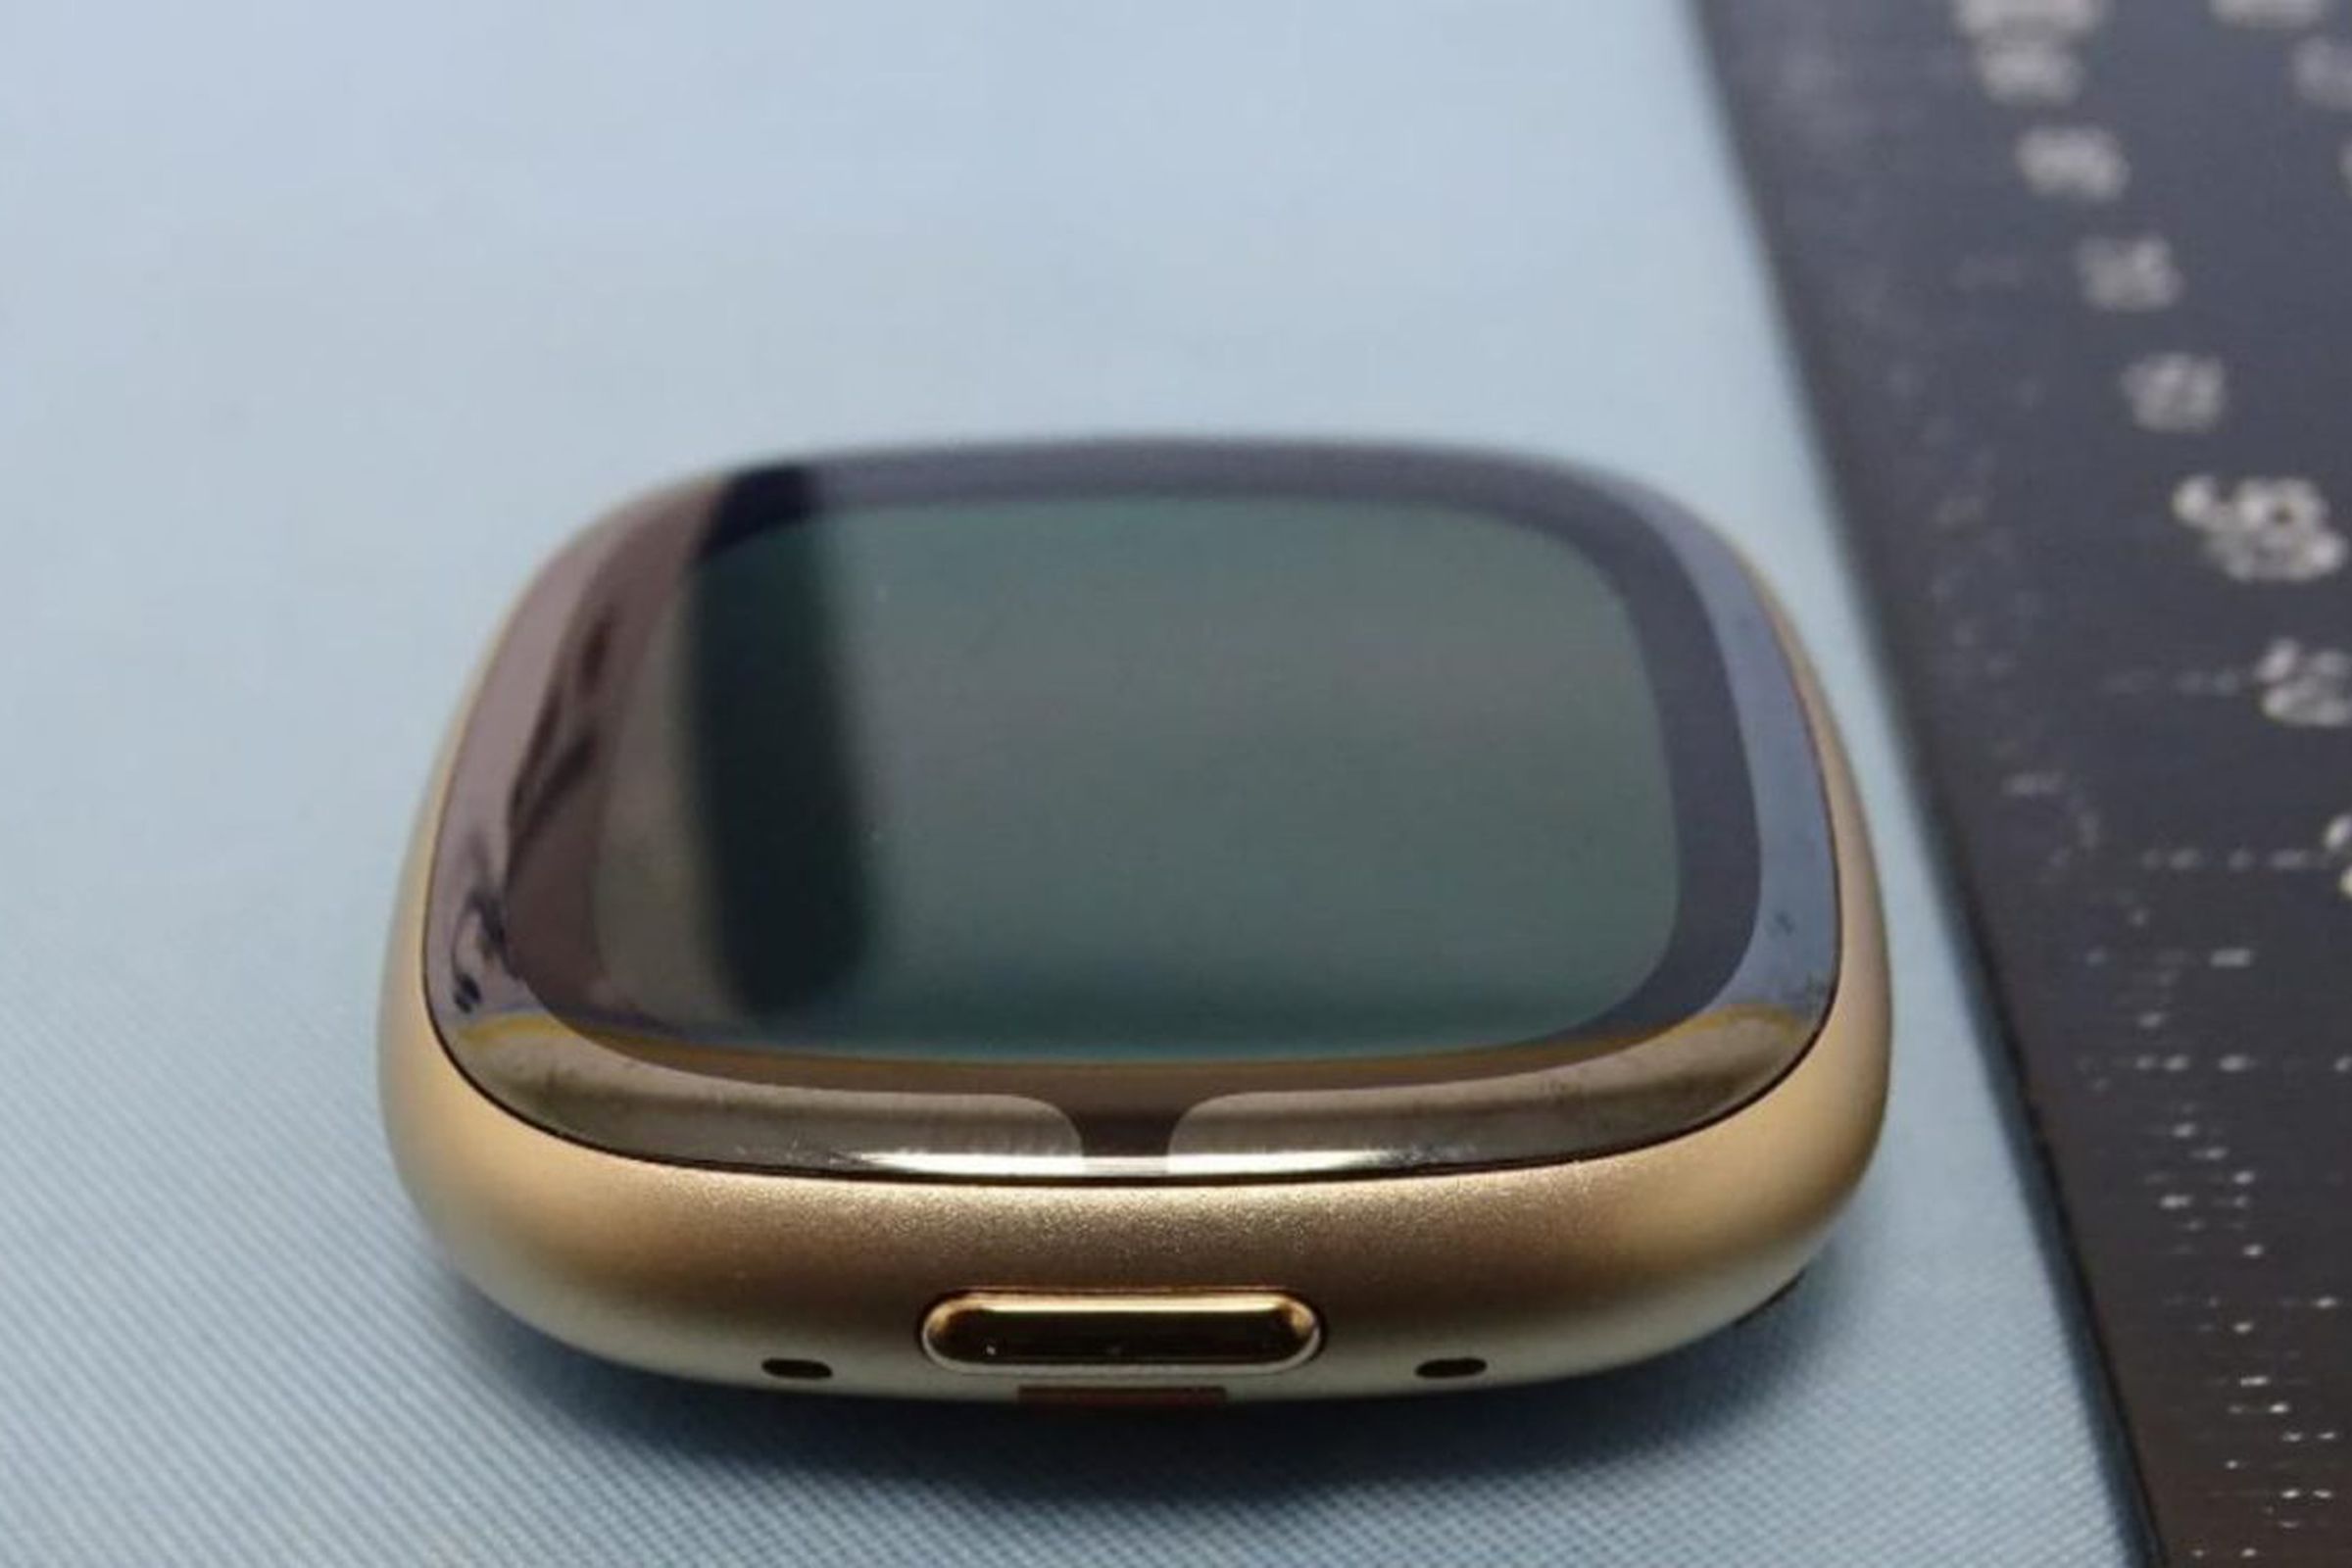 Leaked image of Fitbit Sense 2’s display and case